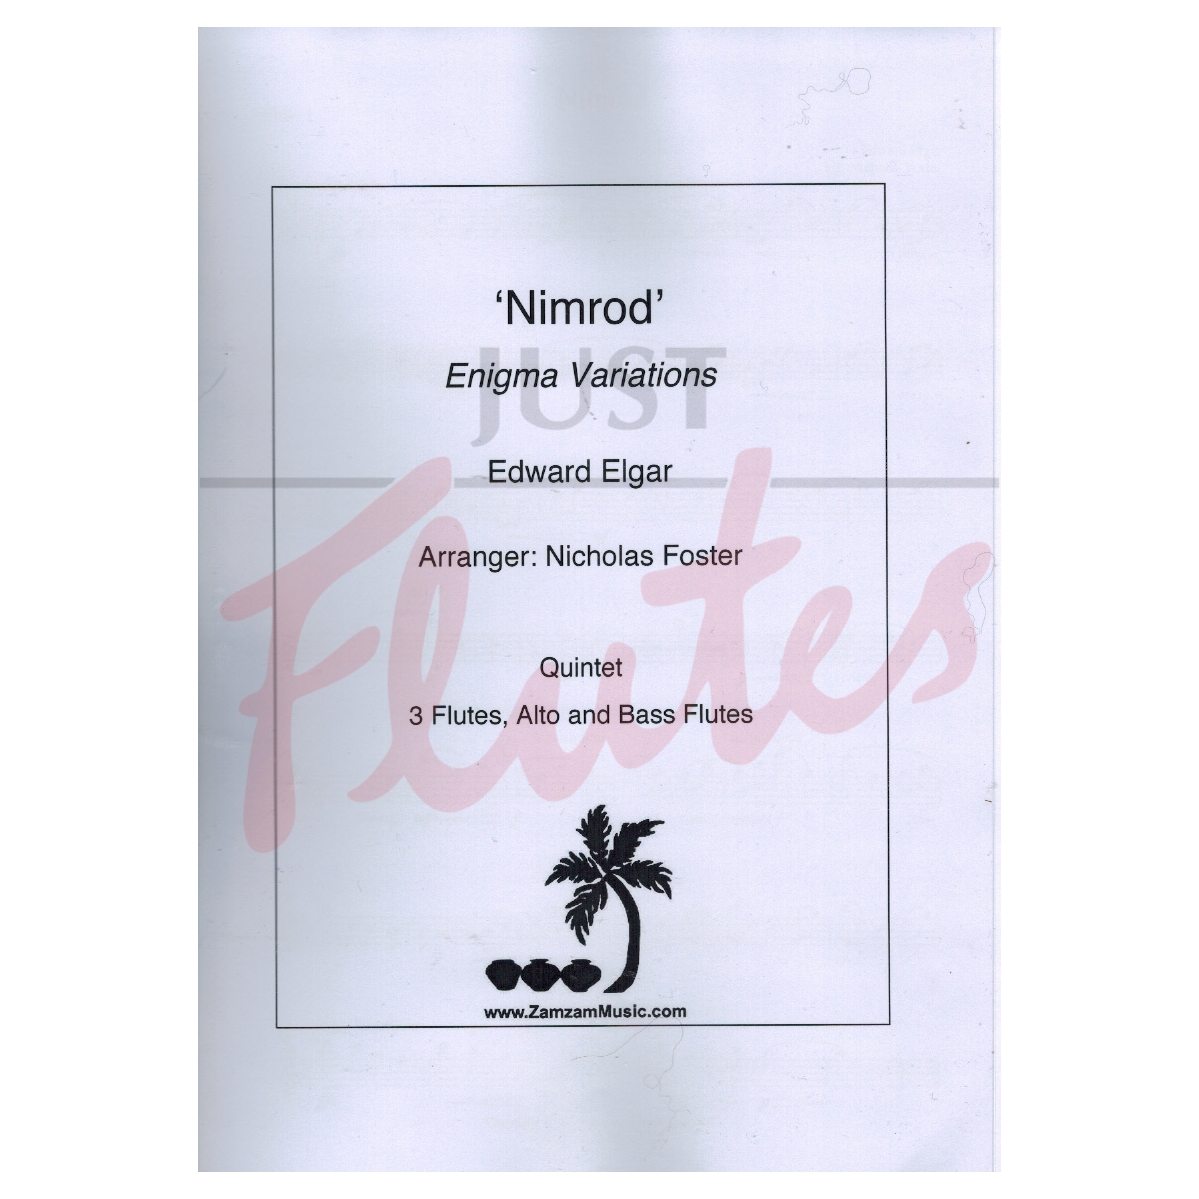 'Nimrod' from Enigma Variations